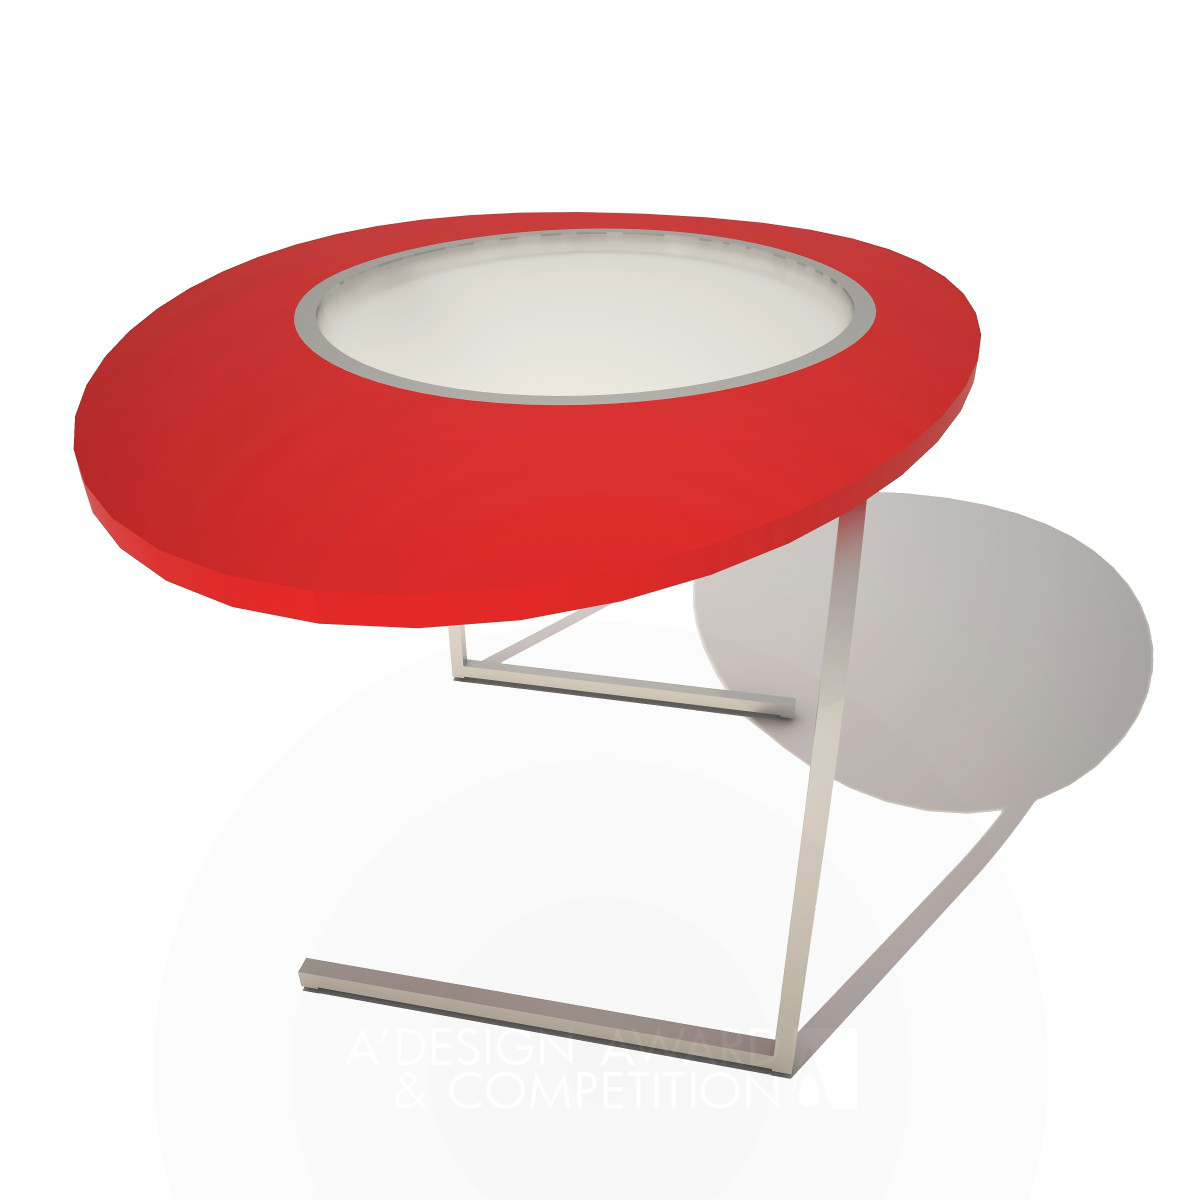 Egg-table <b>home and office furniture